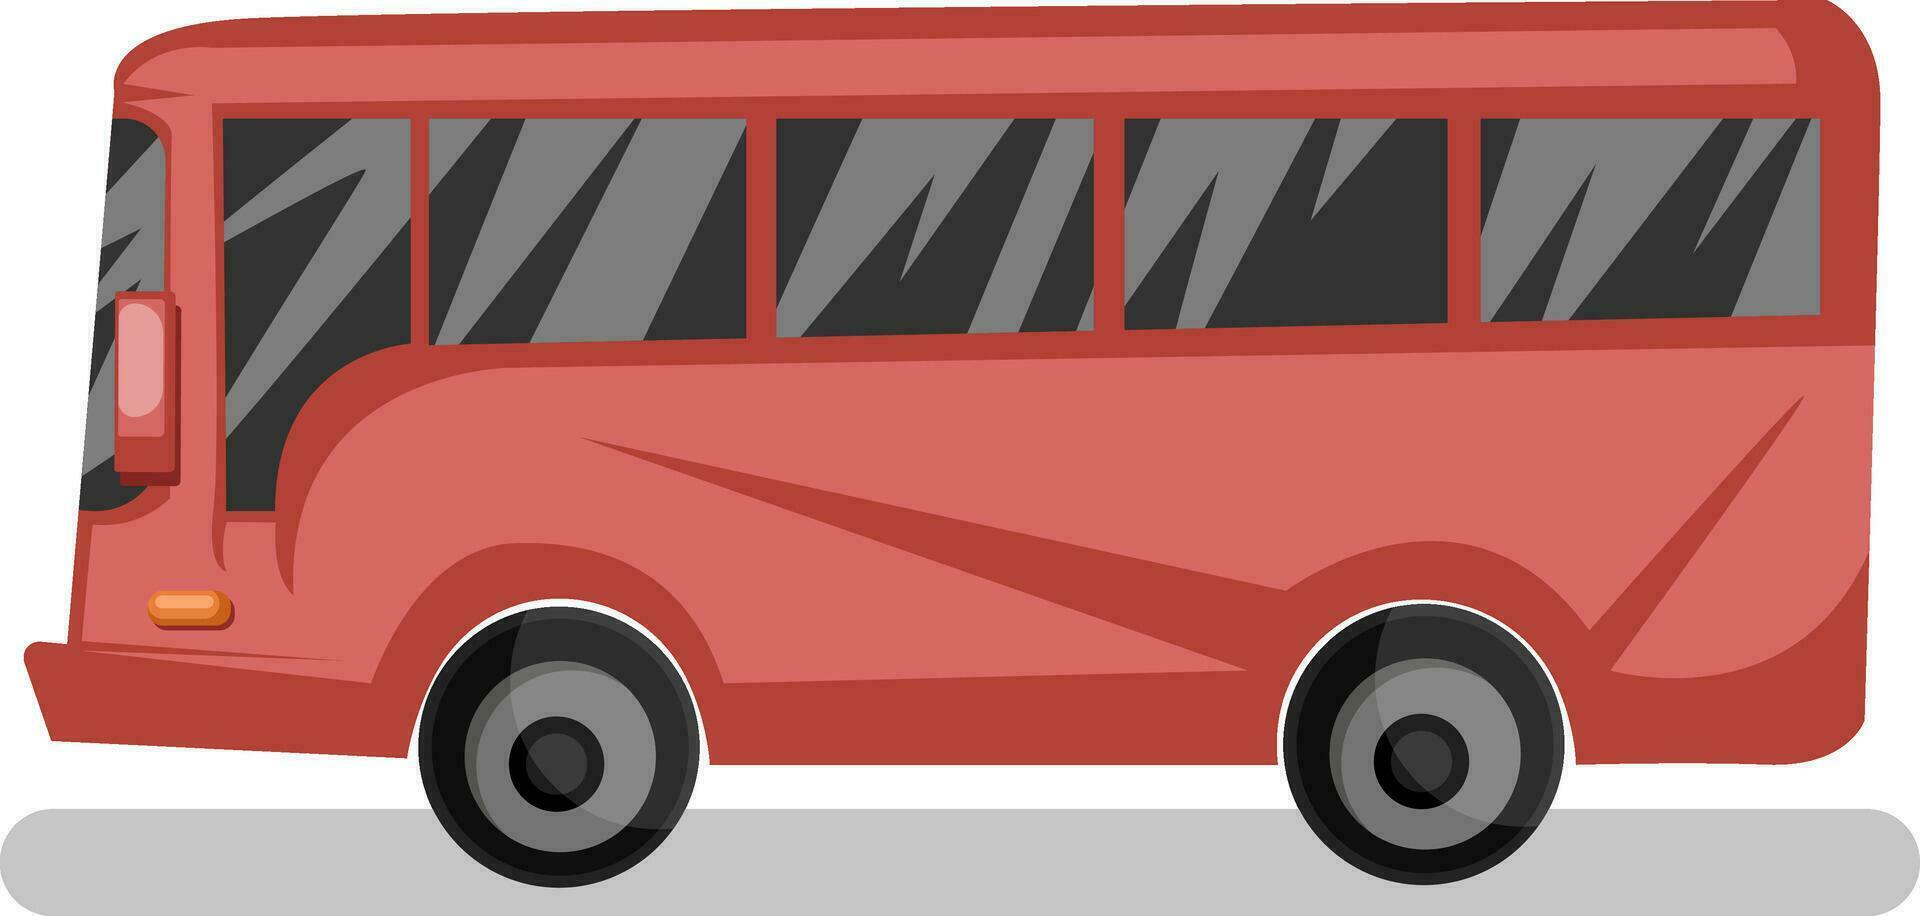 Side view vector illustration of red bus on white background.